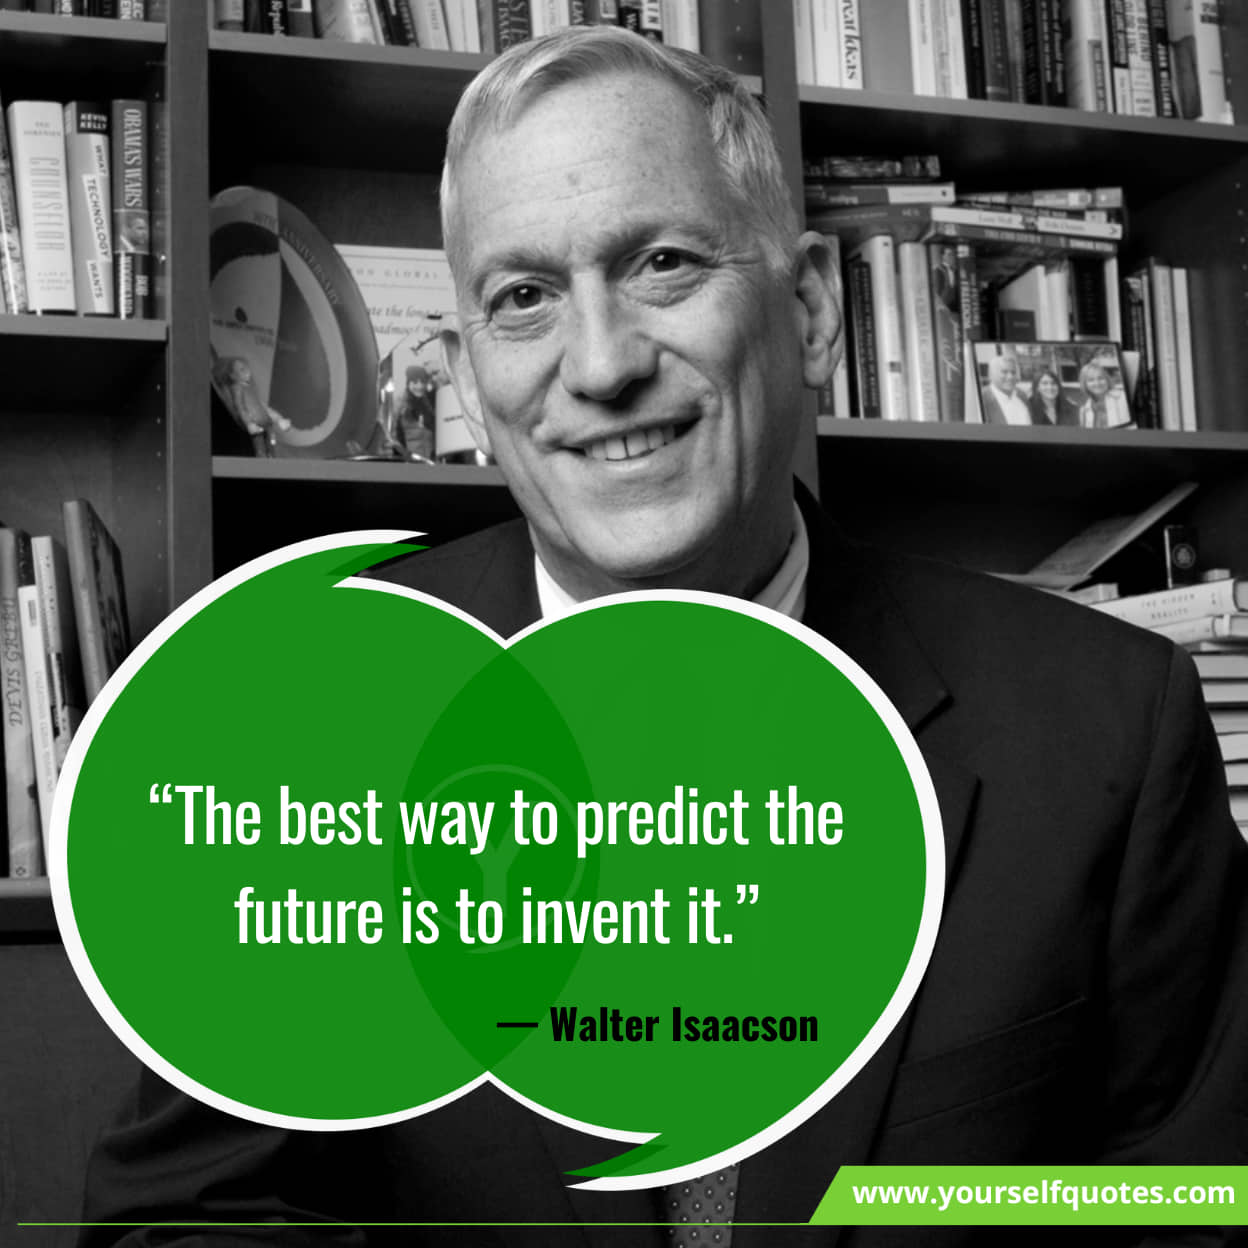 Walter Isaacson Quotes For Success